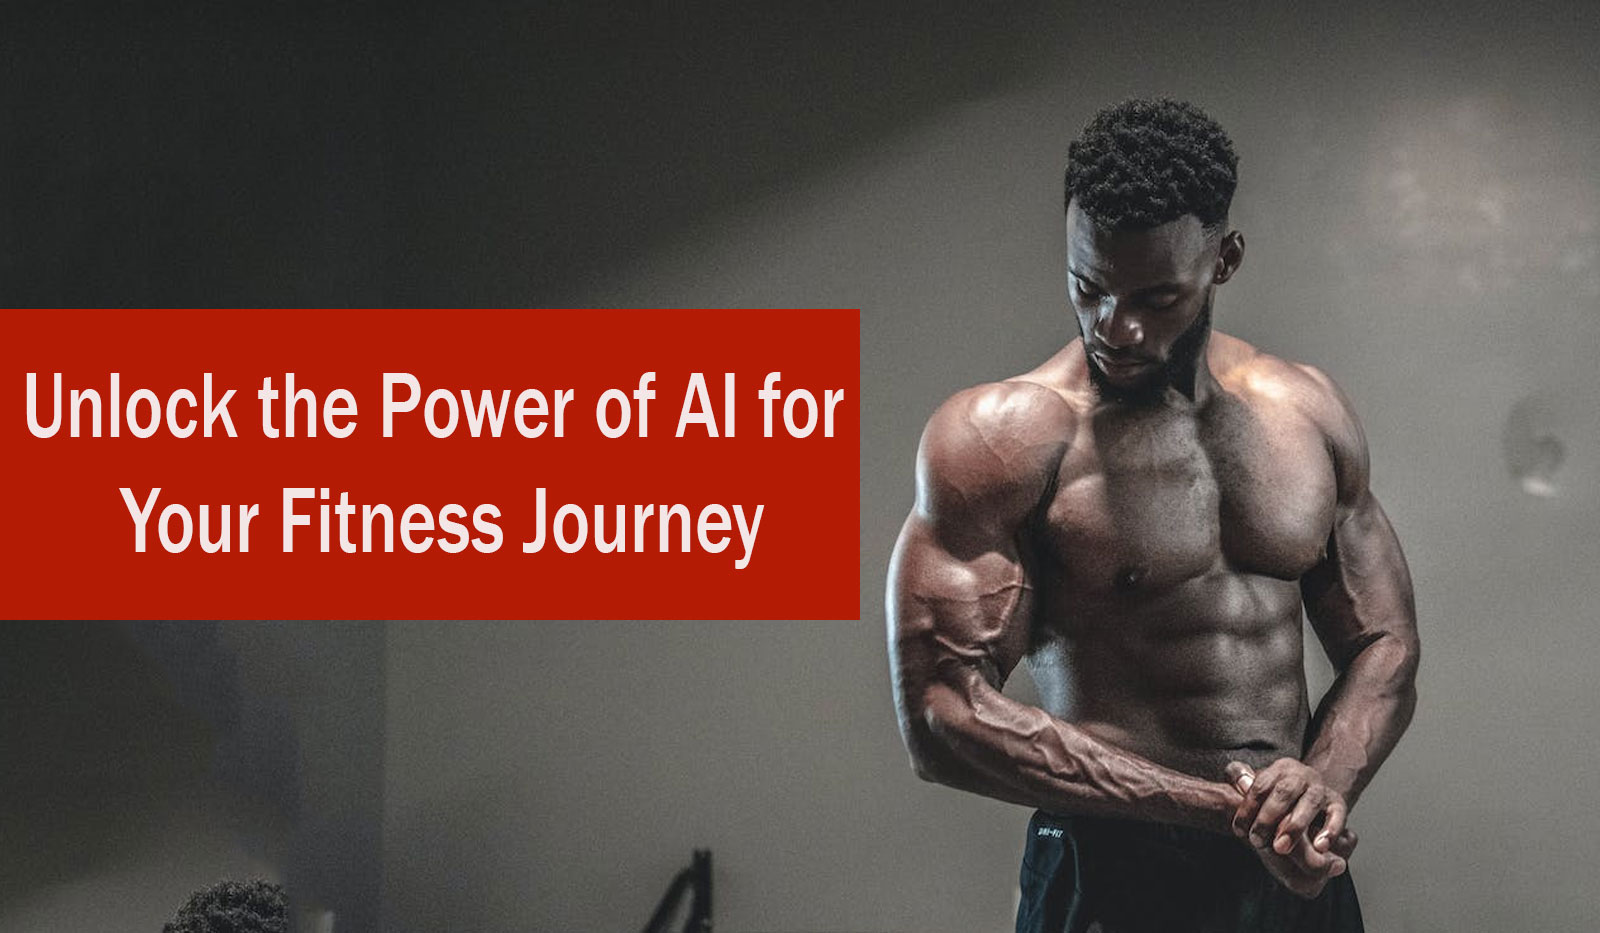 Unlock the Power of AI for Your Fitness Journey